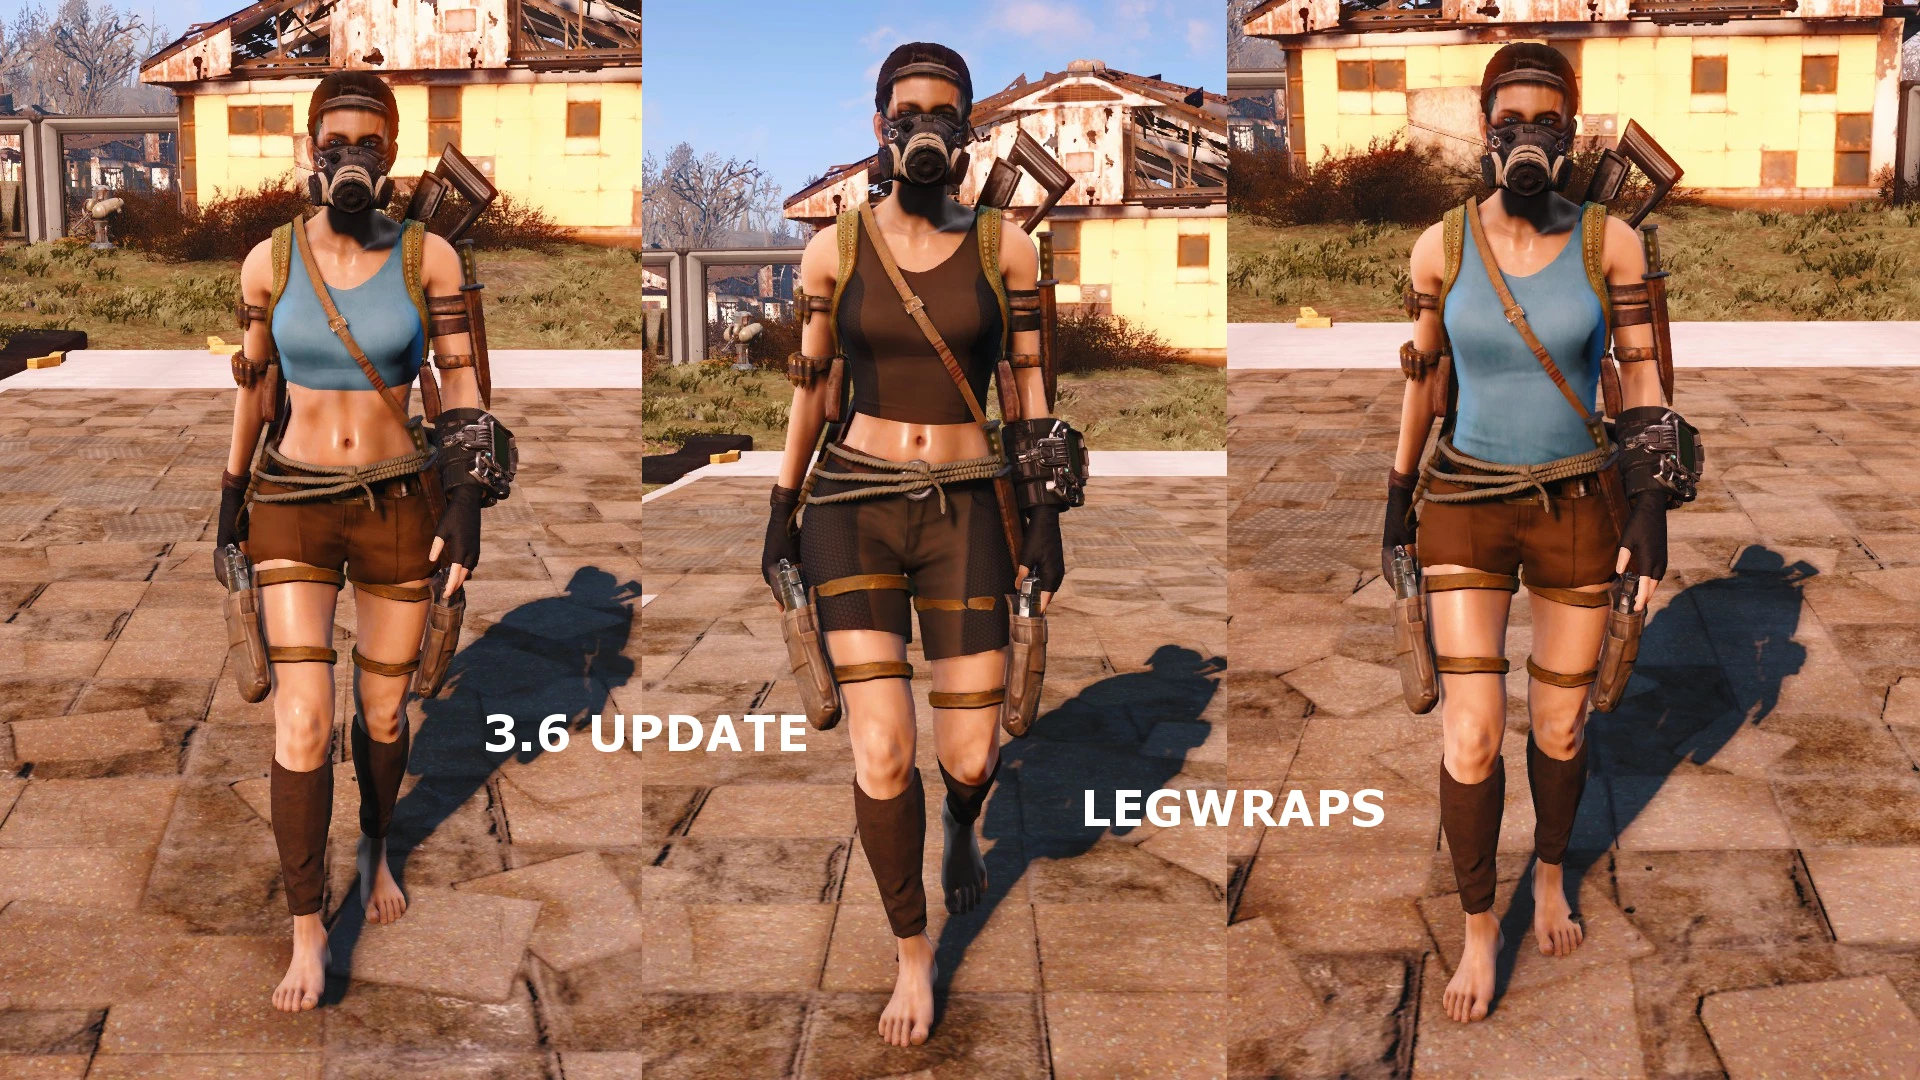 Tomb Raider Outfits (EVB-CBBE) (AE-AWKCR) at Fallout 4 